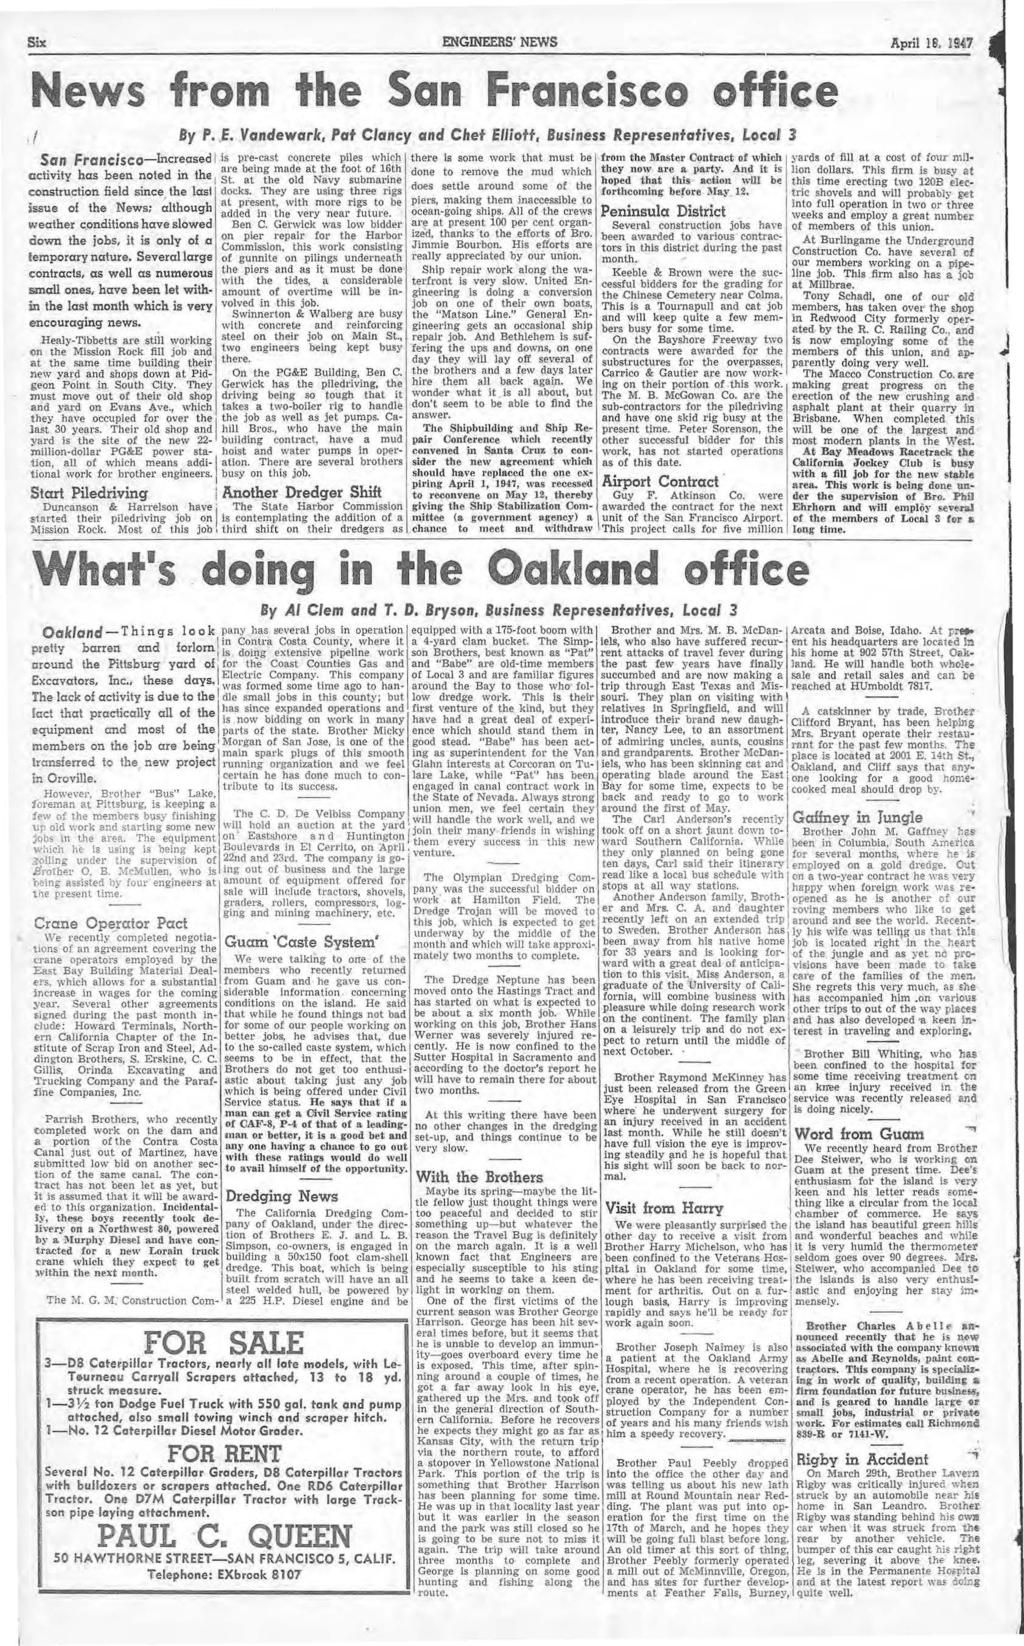 Six ENGNEERS' NEWS News from he San Francisco office ' { By P. E. Vandewark, Pa Clancy rirnd Che Ellio, Business Represenaives, Local 3 Son f rancisco-lncreased is pre_-cas concree piles which.